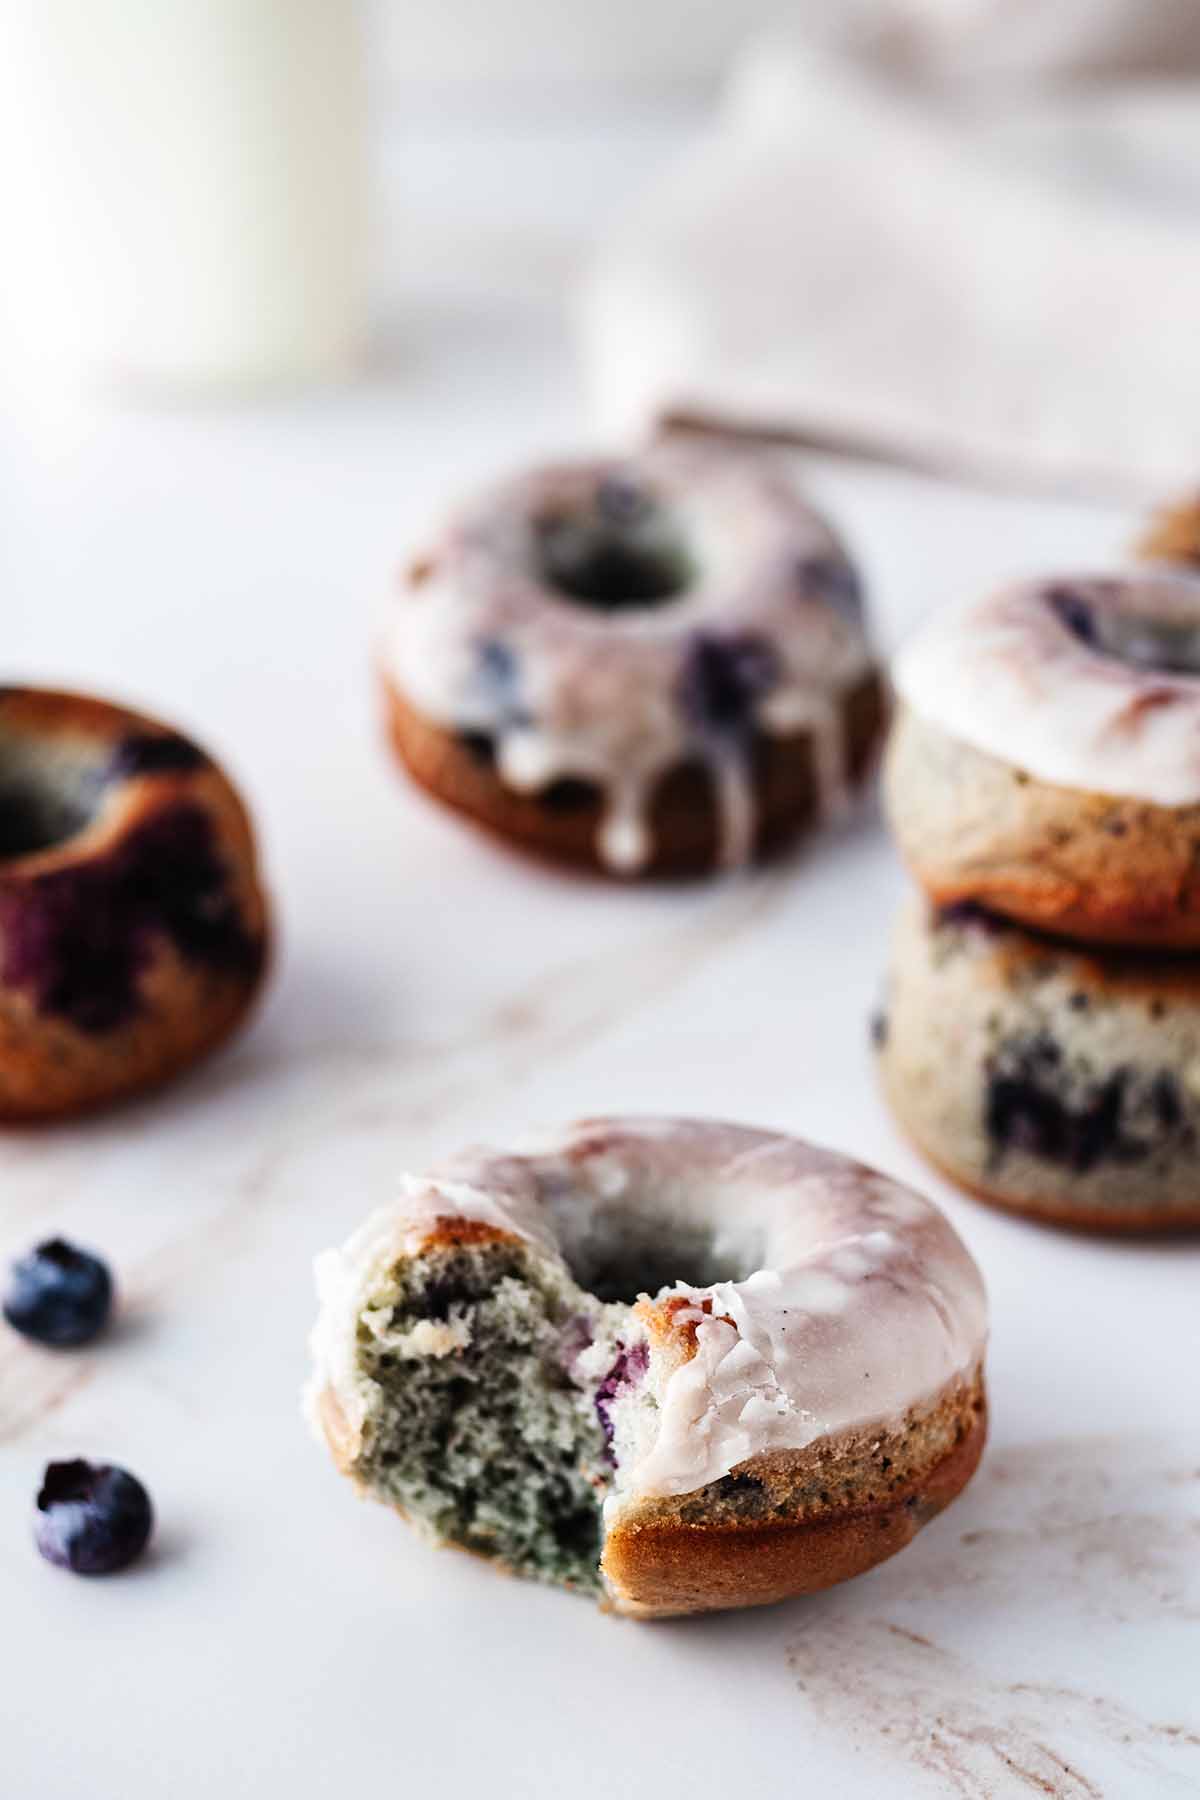 Blueberry and blueberry donuts on a marble surface.  A bite was taken out of one donut.